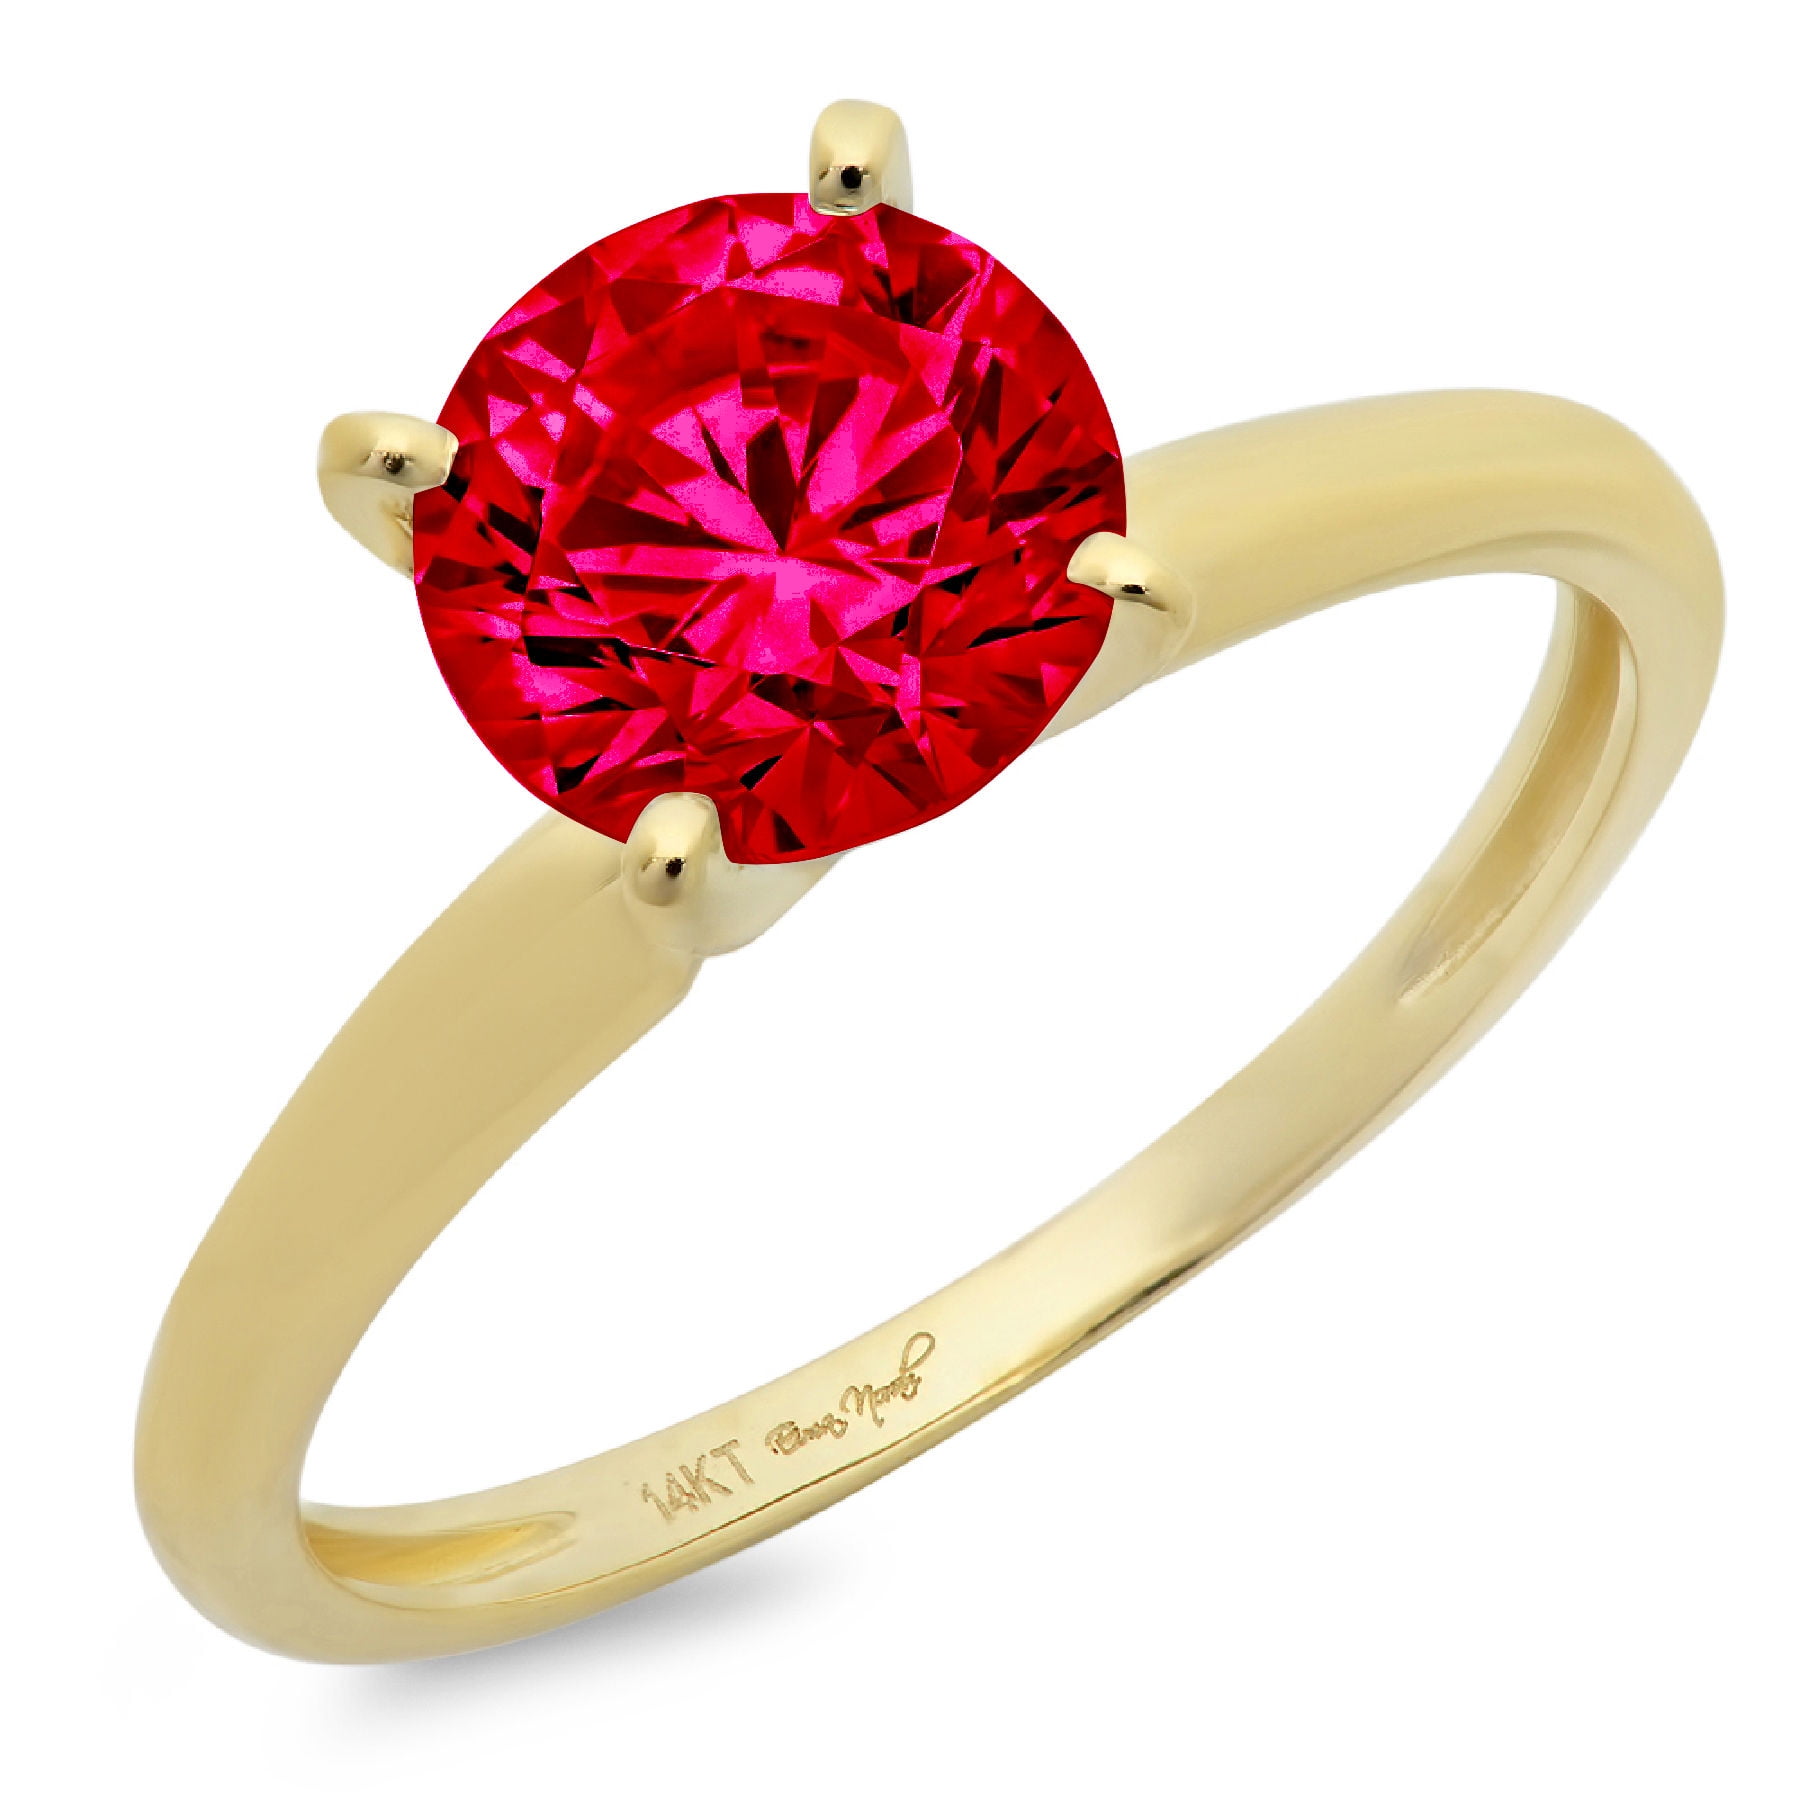 2.0 ct Brilliant Marquise Cut VVS1 Simulated Ruby Yellow Solid 14k or 18k Gold Robotic Laser Engraved Handmade Anniversary Solitaire Ring